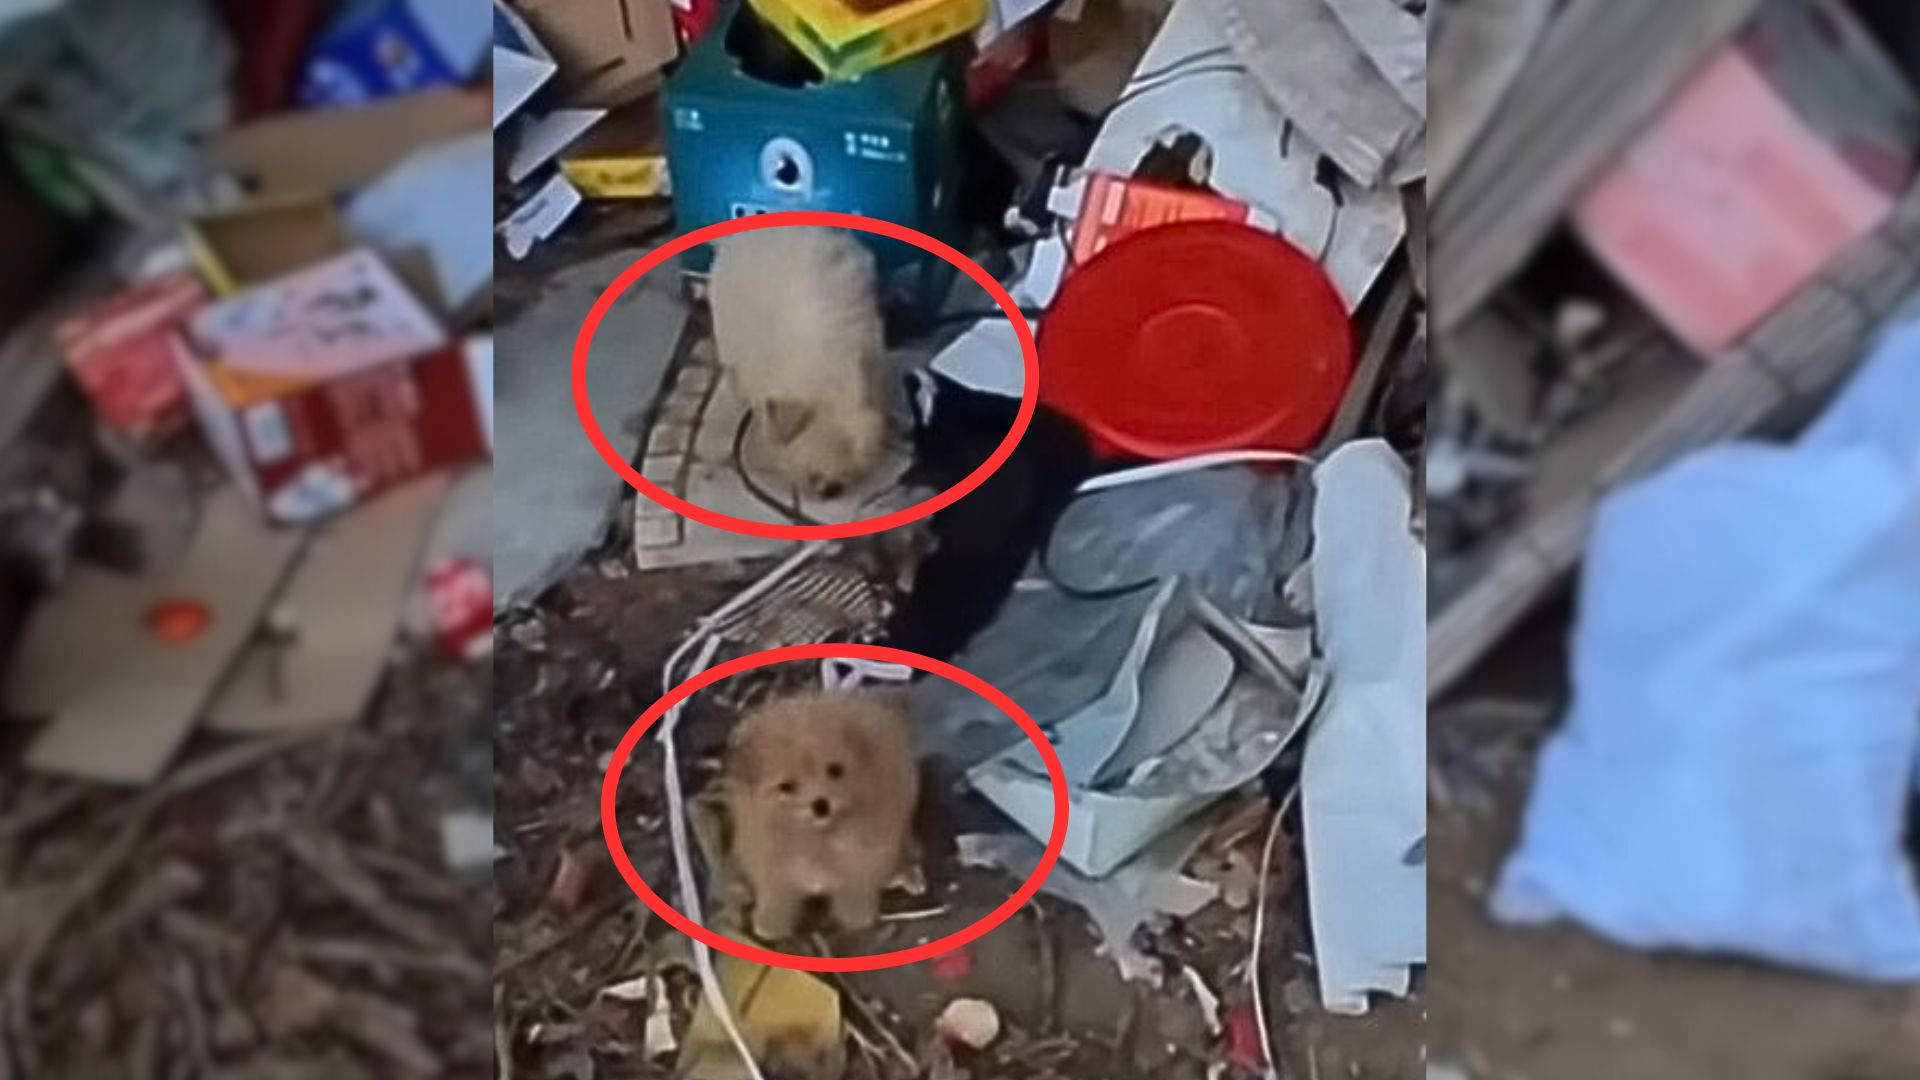 Abandoned Puppies Were Looking For Food In The Trash Until Kind Rescuers Came To Help Them